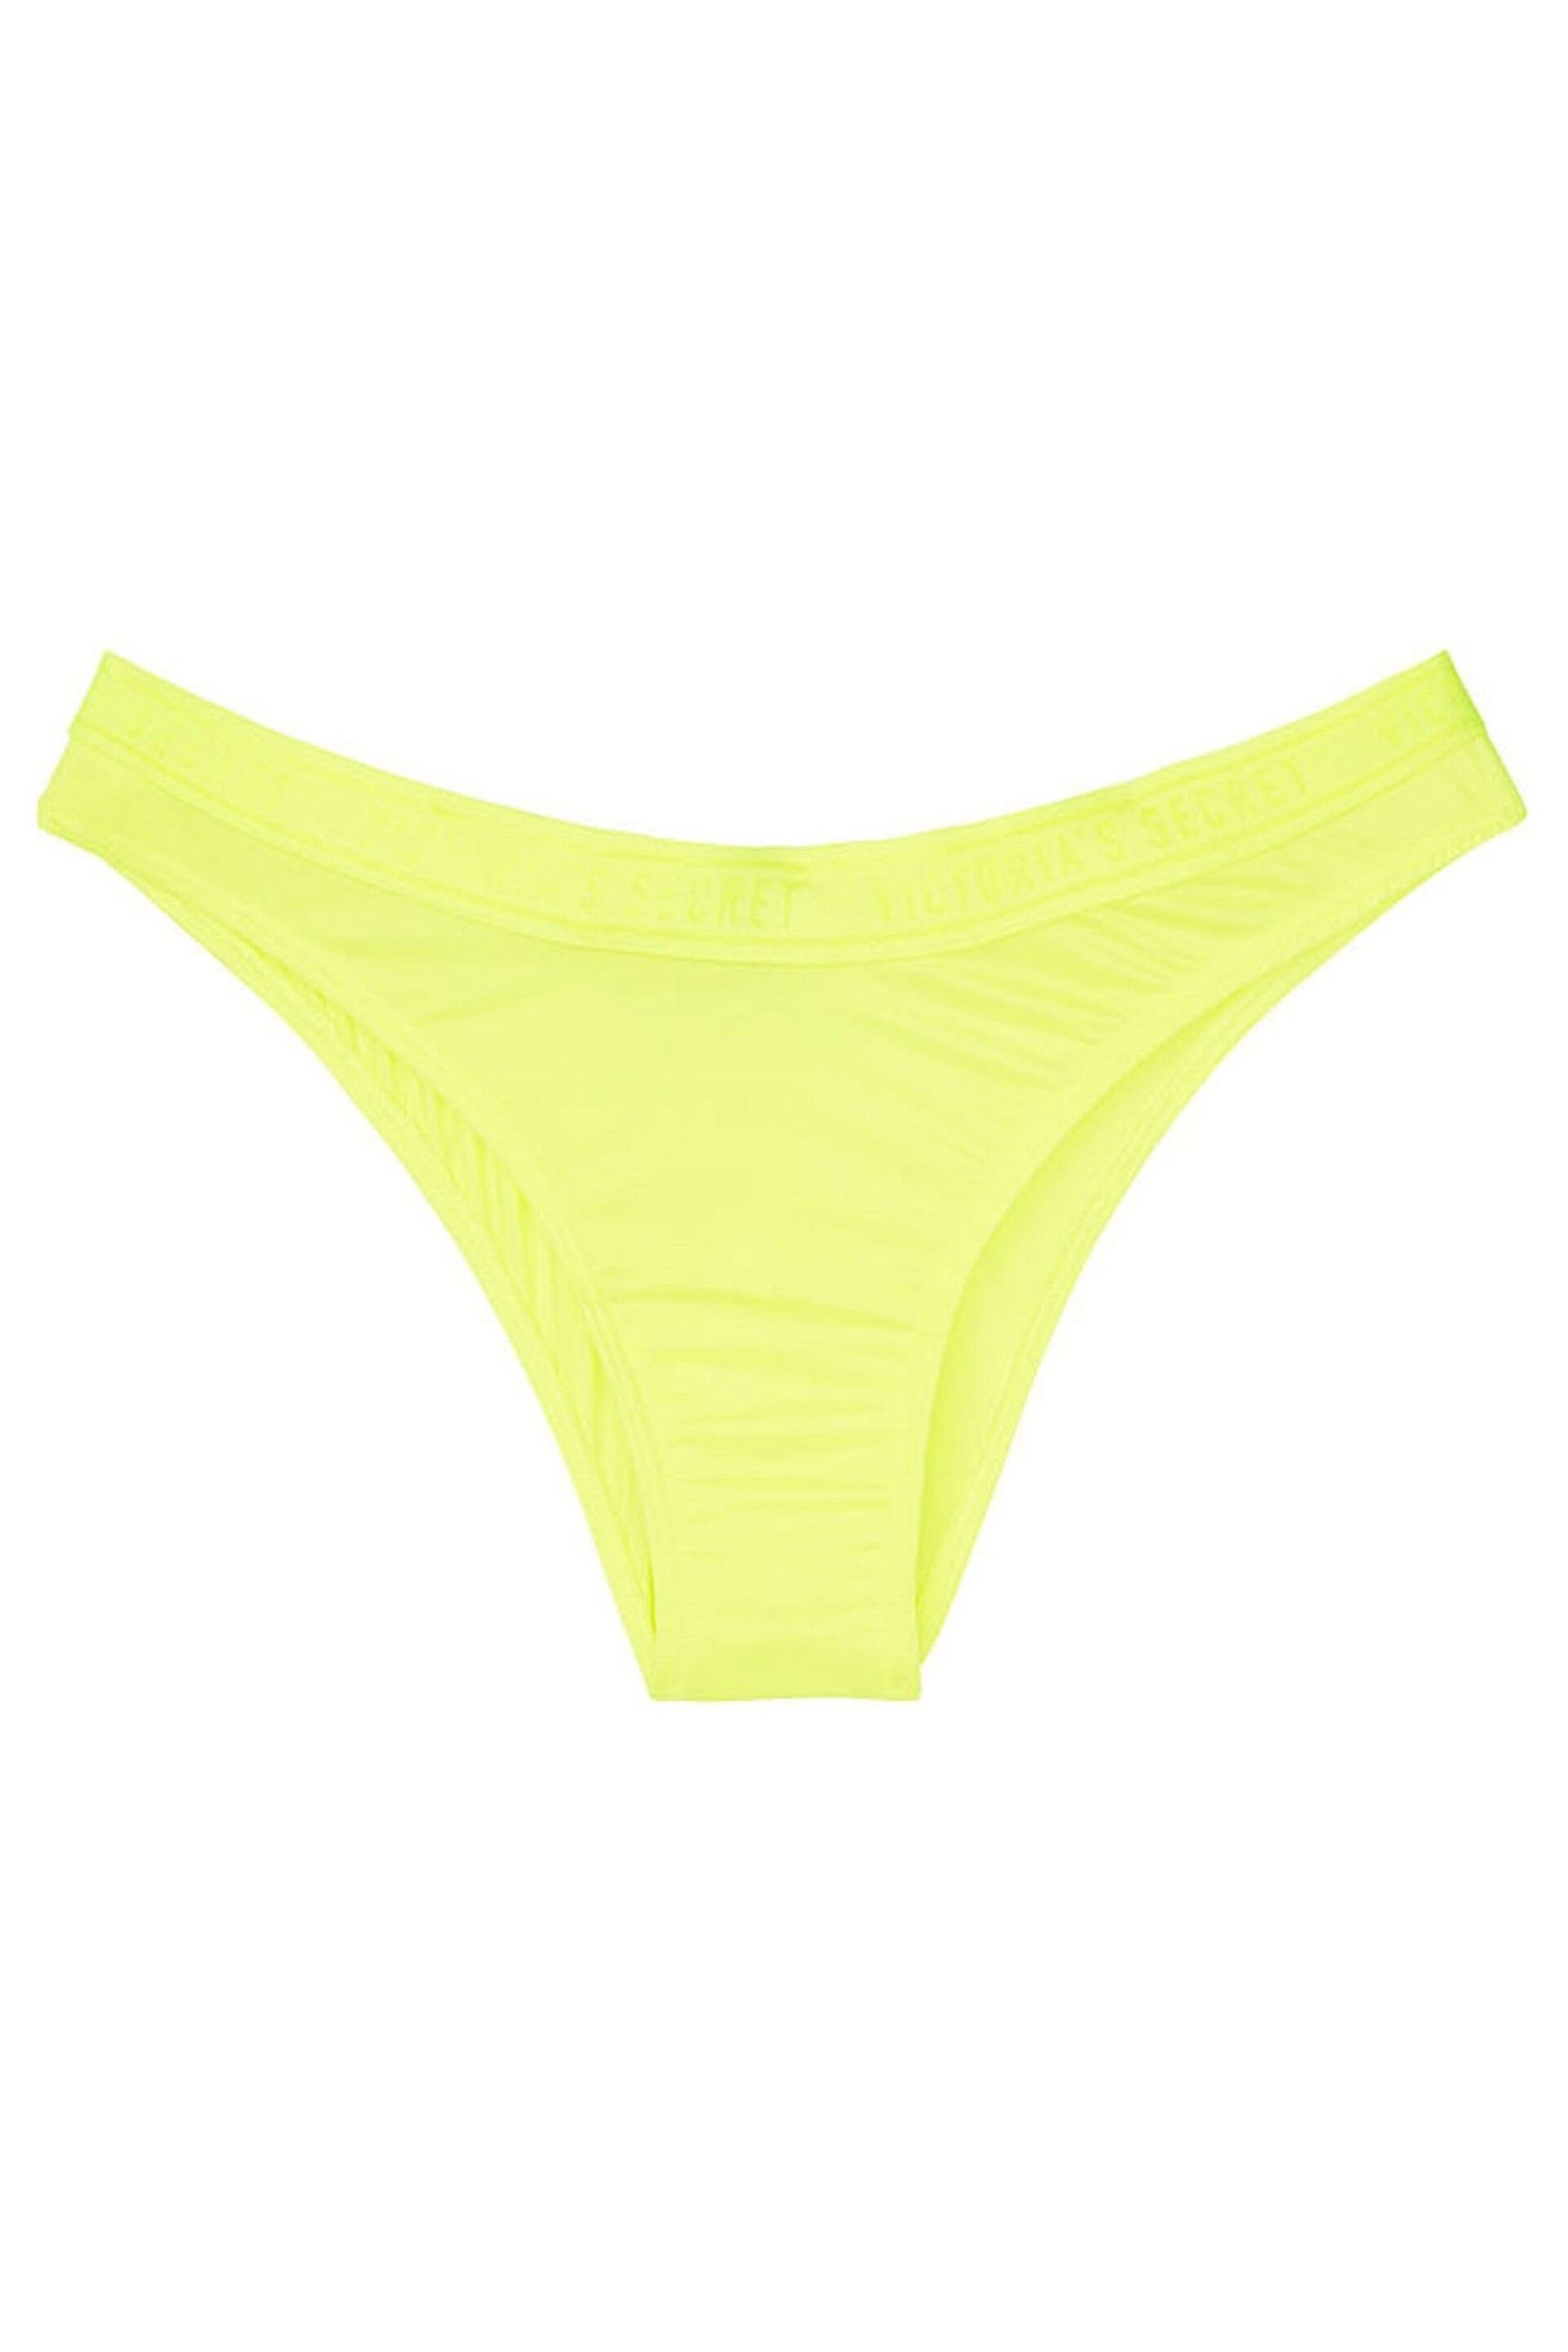 Victoria's Secret PINK Yellow No Show Hipster Knickers - Image 1 of 1